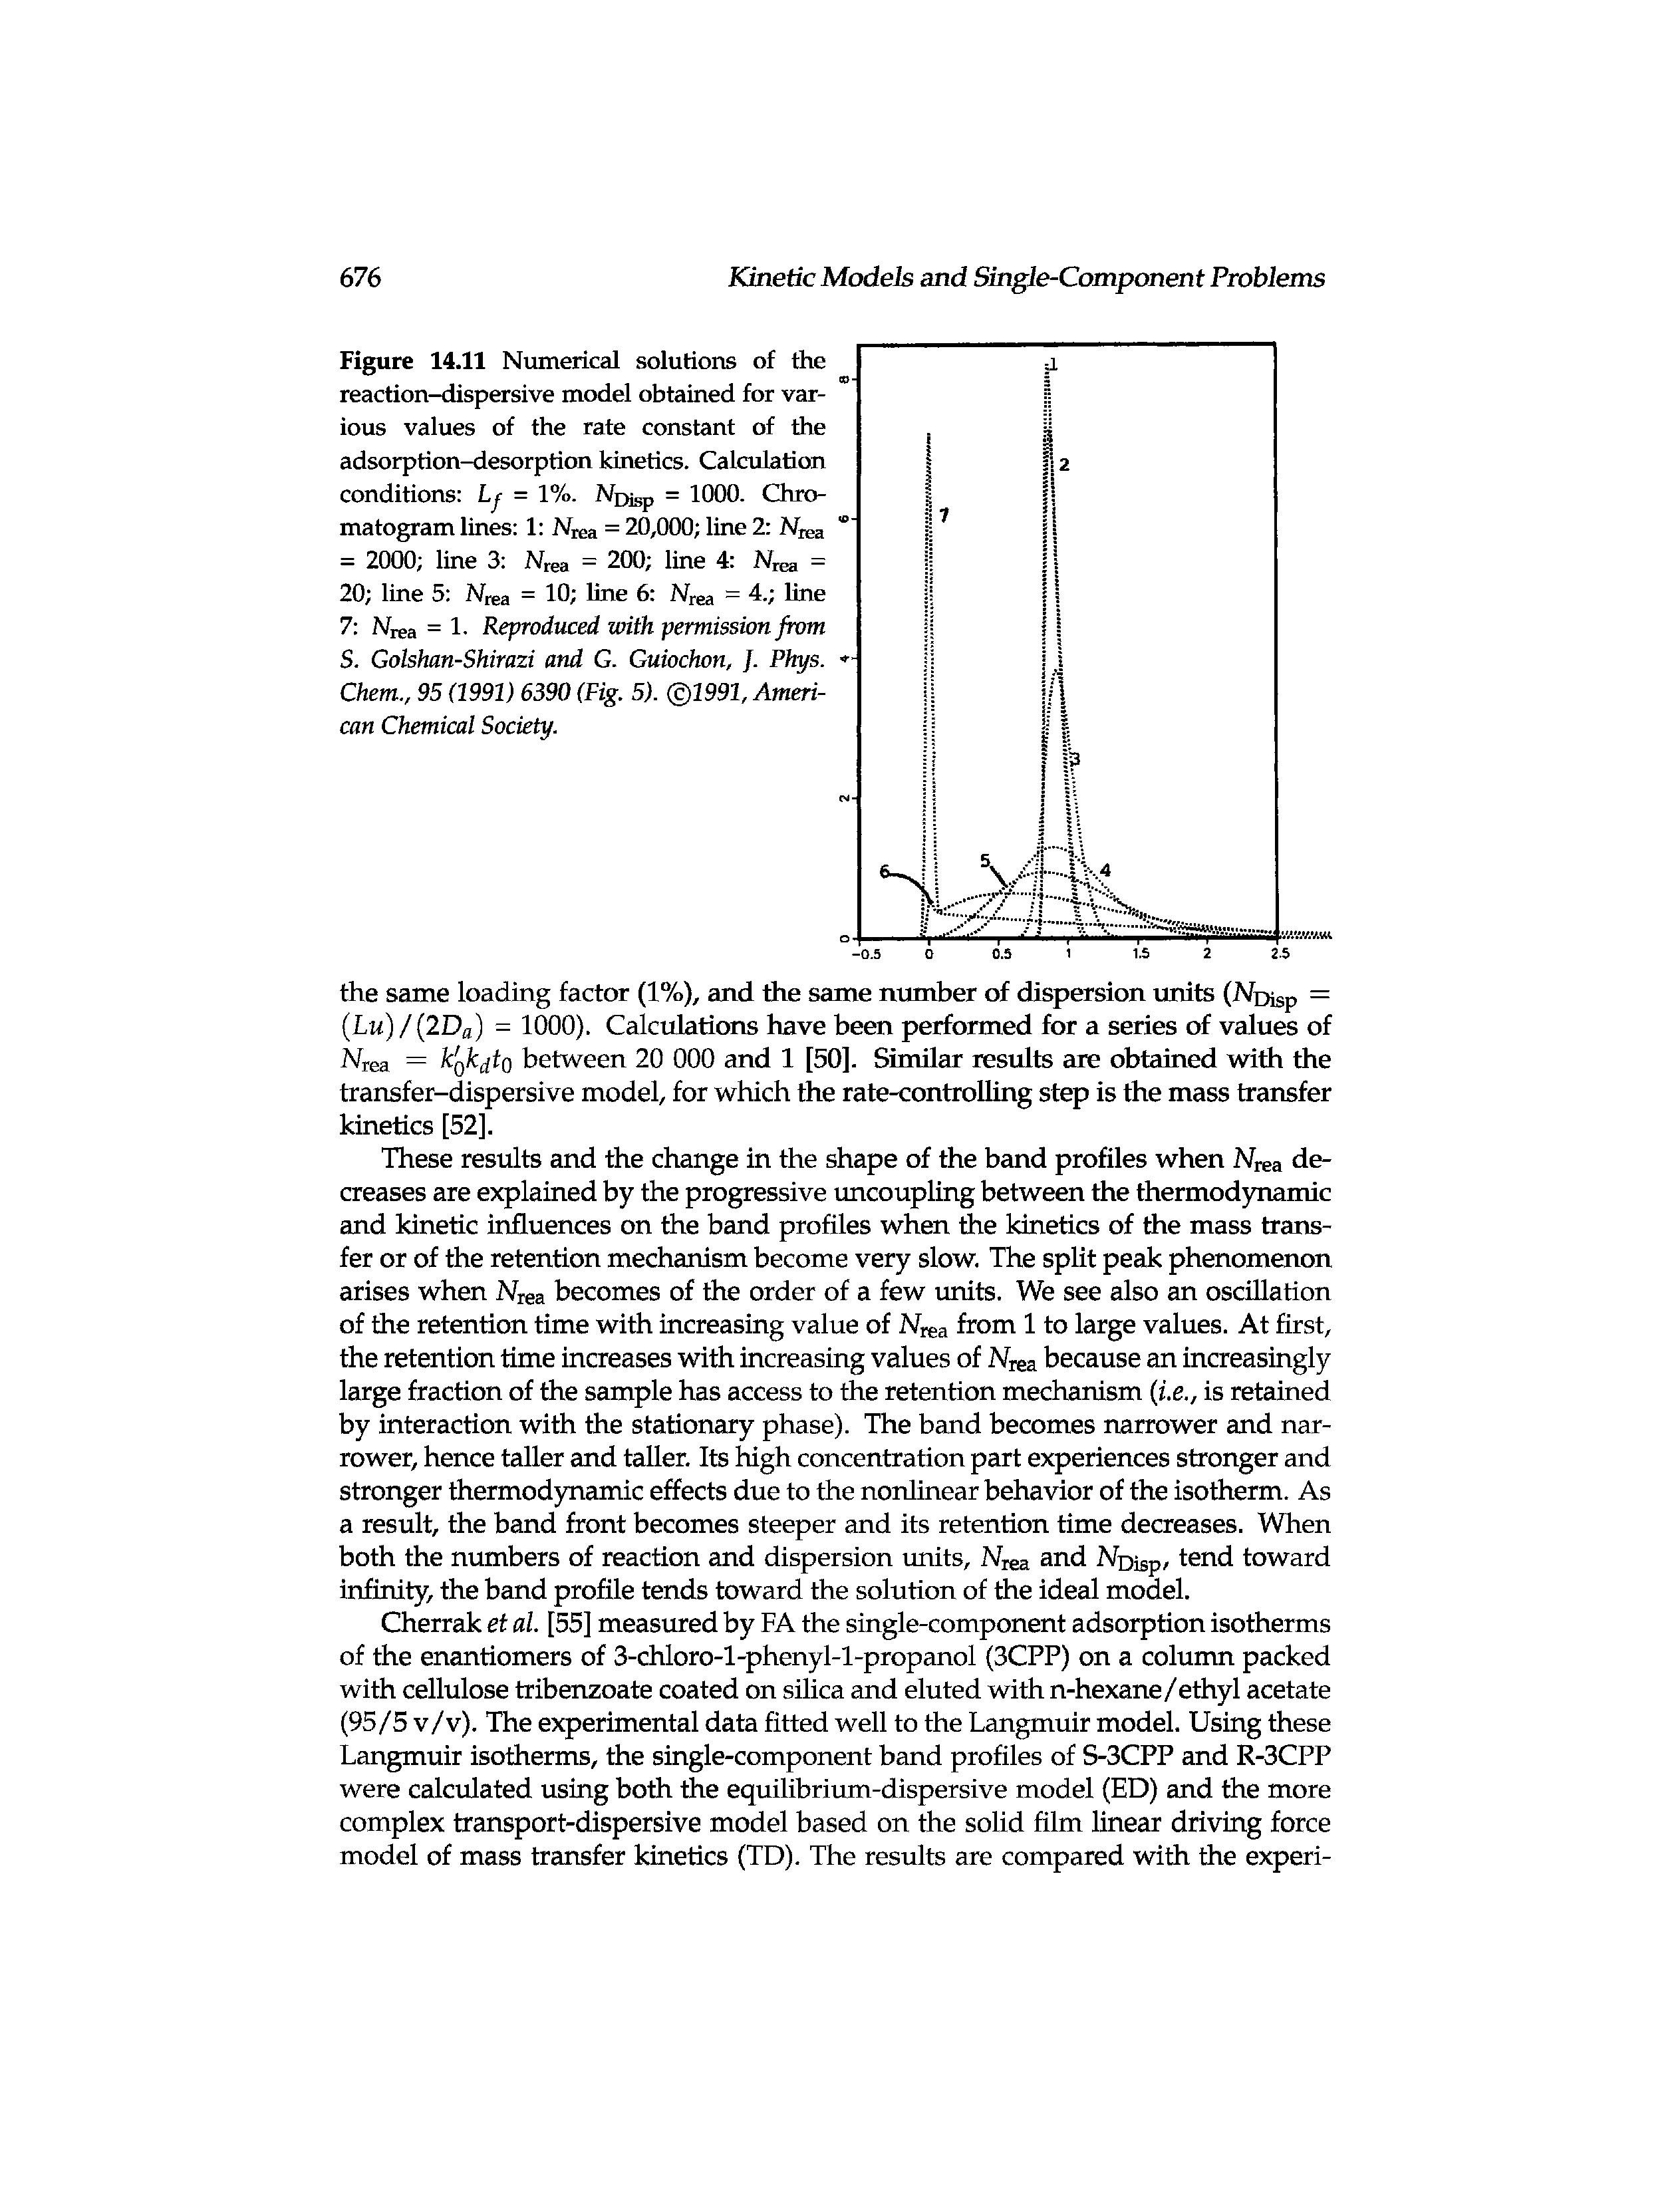 Figure 14.11 Numerical solutions of the reaction-dispersive model obtained for various values of the rate constant of the adsorption-desorption kinetics. Calculation conditions = 1%. Npisp = 1000. Chro-...